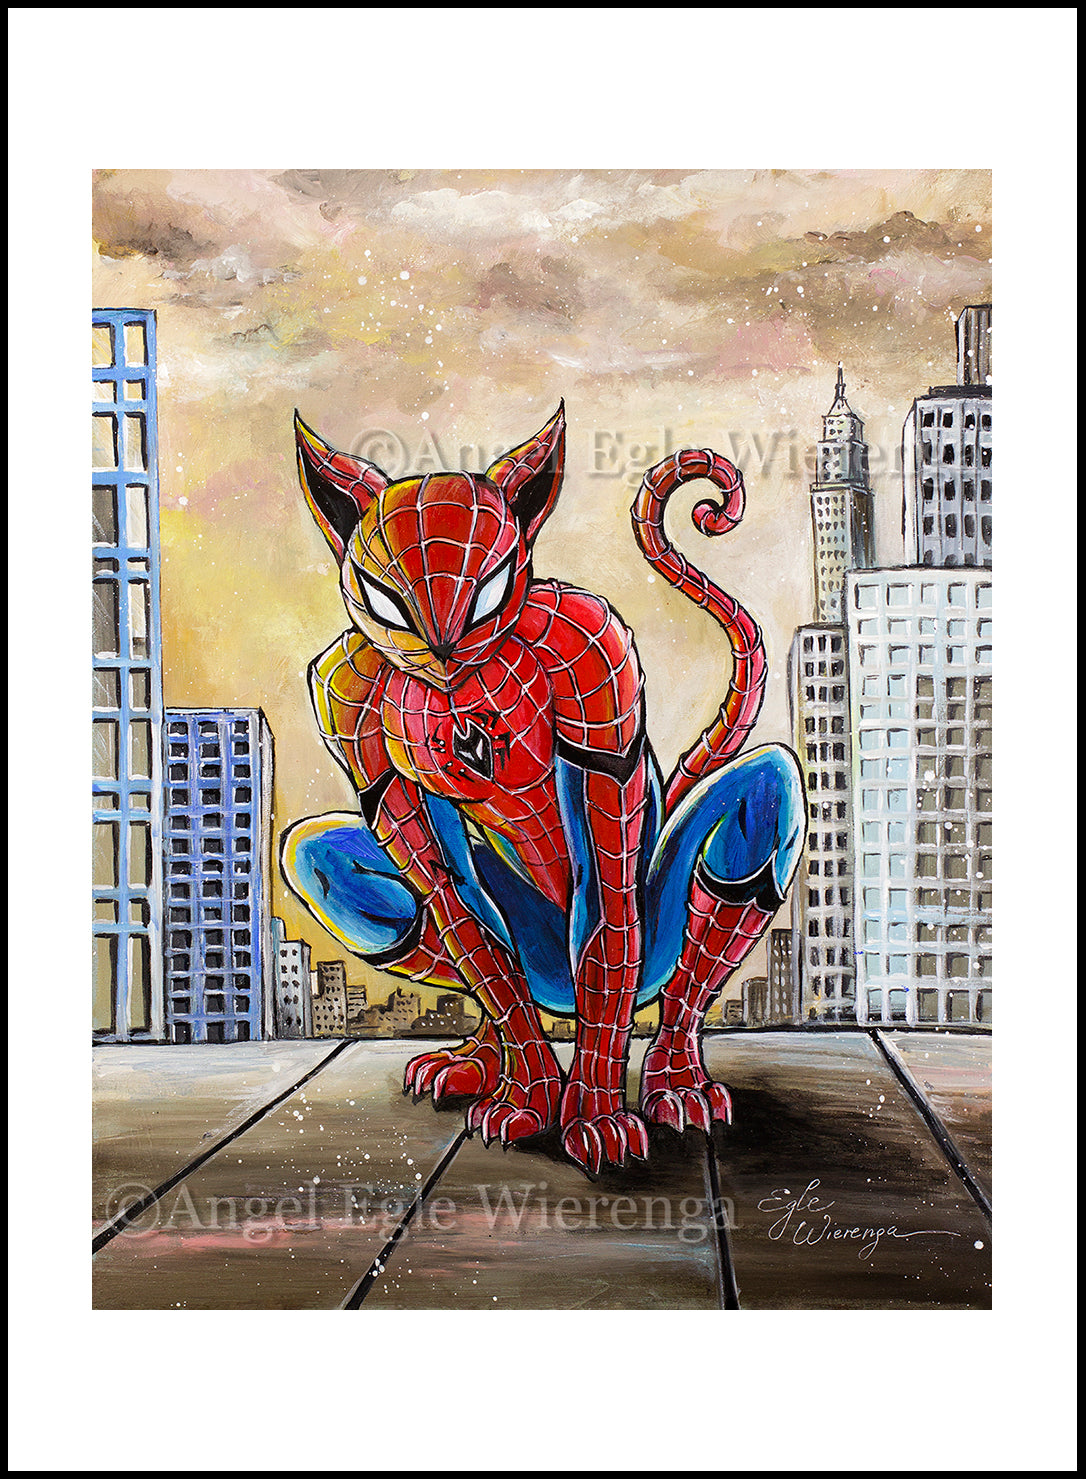 CANVAS "SpiderKitty" Open & Limited Edition